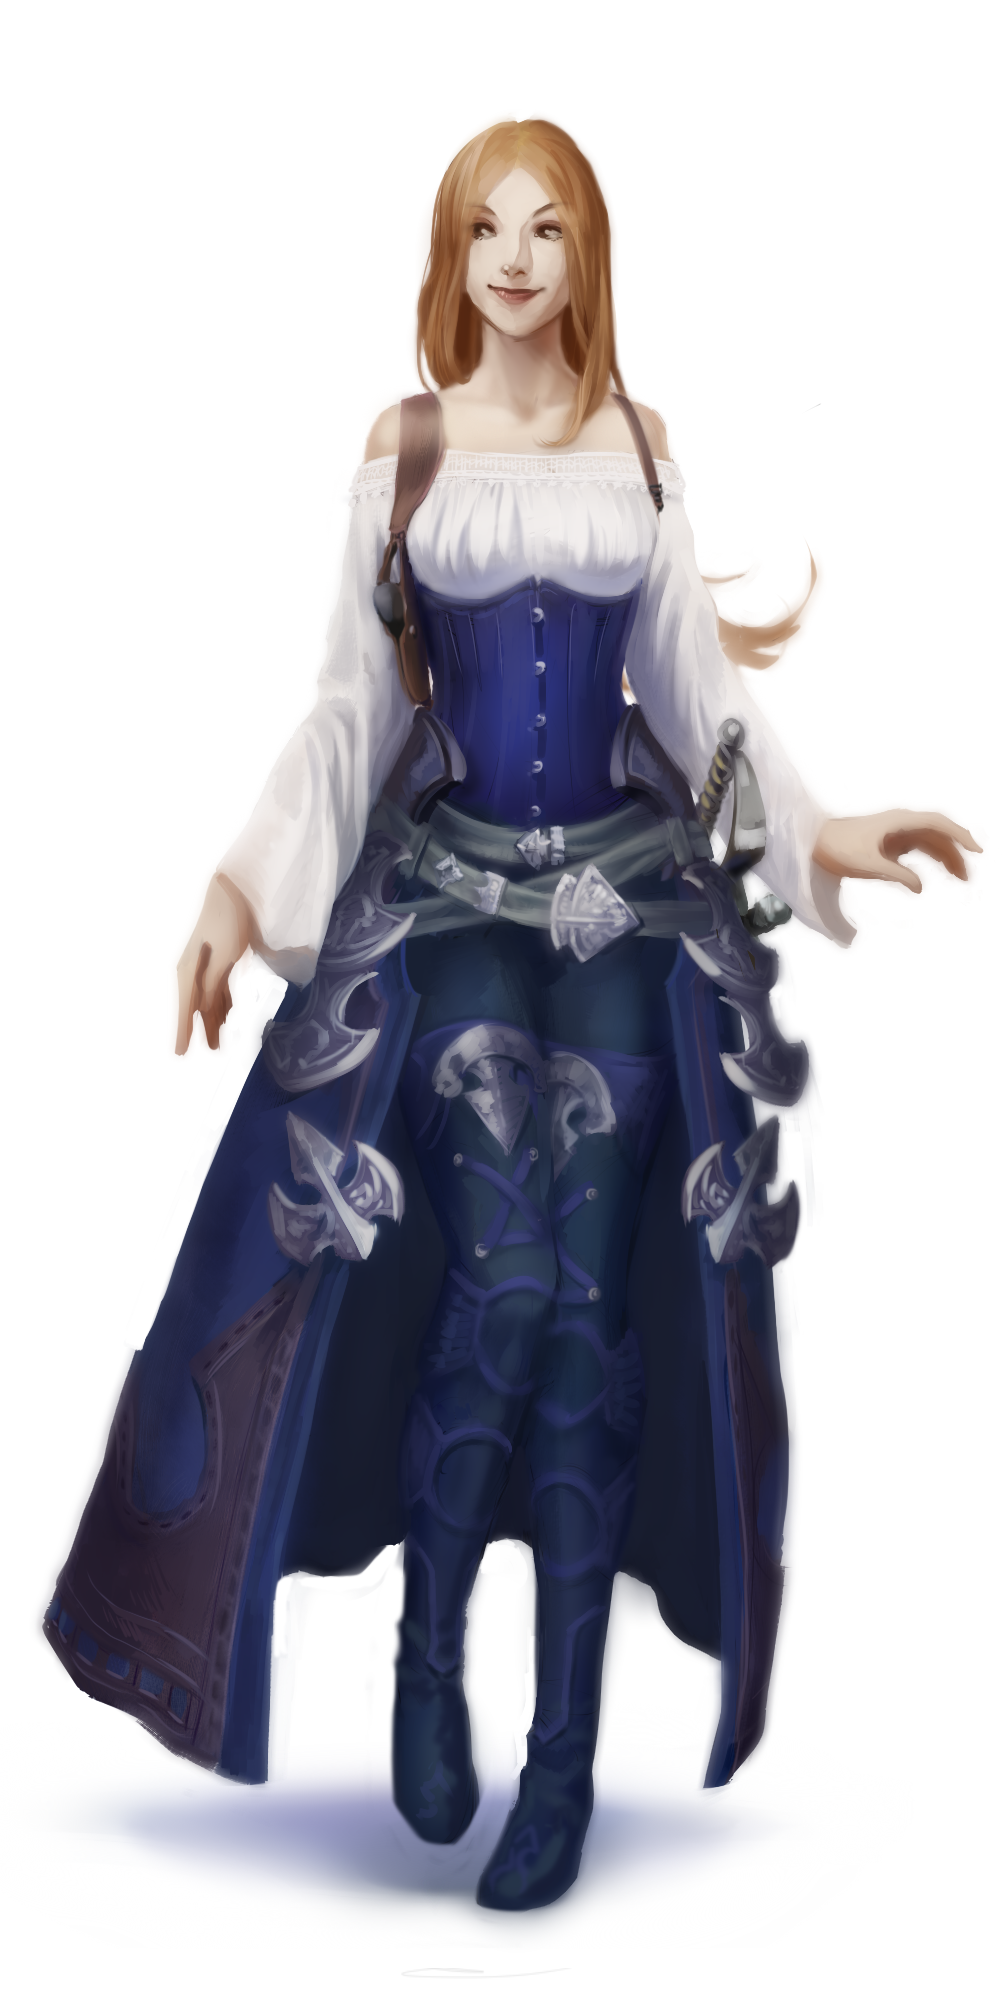 Character is [ASZH - BEE] (A-S-H-B-I-E) from DSL, this is a slightly older iteration: The shoulder-length blonde haired woman here is decked out in an outfit meant to impress. She has a full corset of sapphire blue worn over a white cotton top. The top has a boat neckline with full-length sleeves. She has navy leggings on her legs and wears a sort of half-skirt which is open in the front but drops to her ankles in the back. Supple blue leather boots of the same color as the leggings cling to her feet. She is armed to the teeth with multiple belts and bladed weapons decorating the skirt.